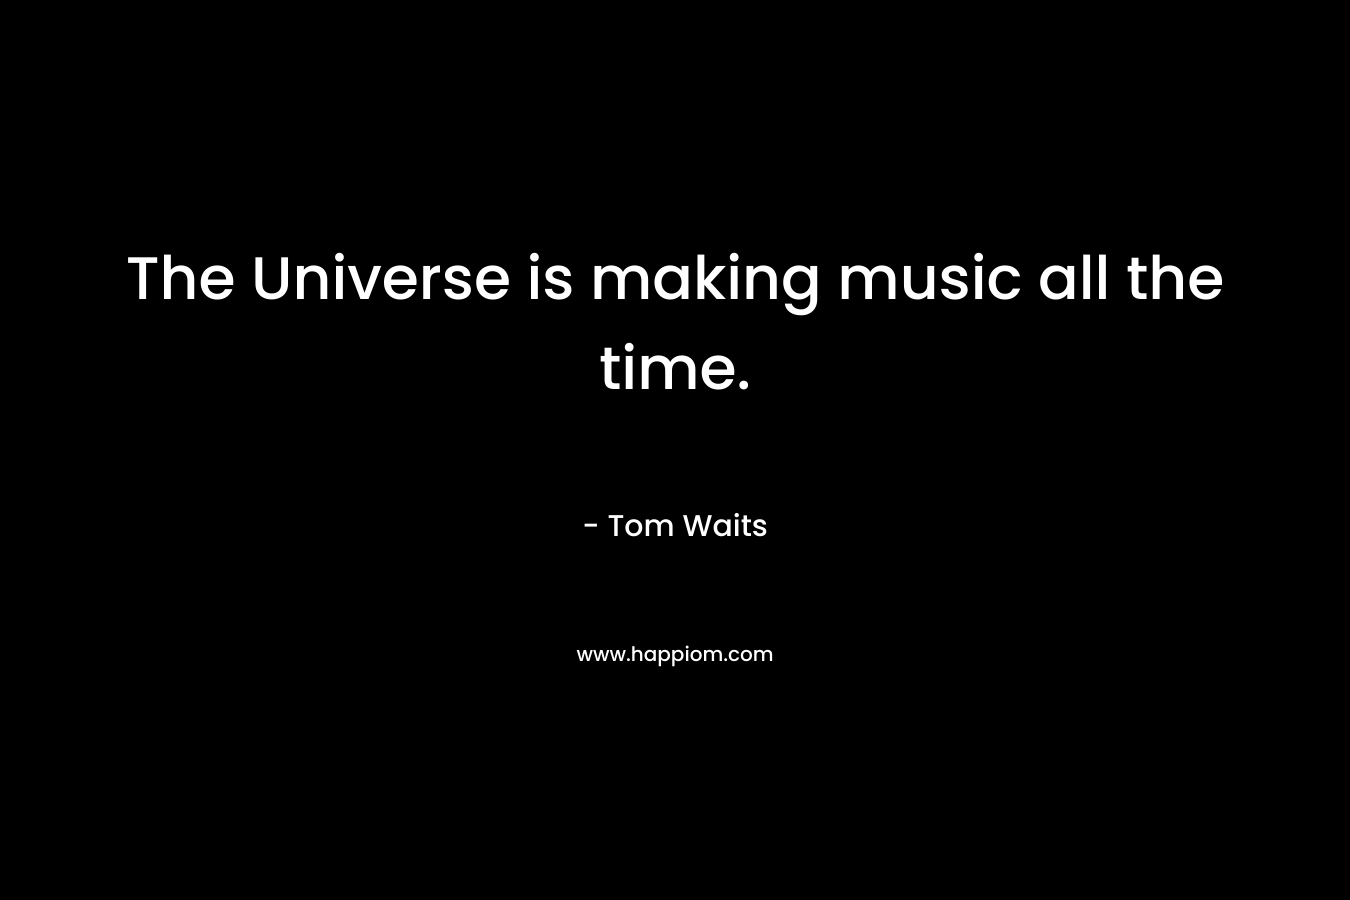 The Universe is making music all the time. – Tom Waits